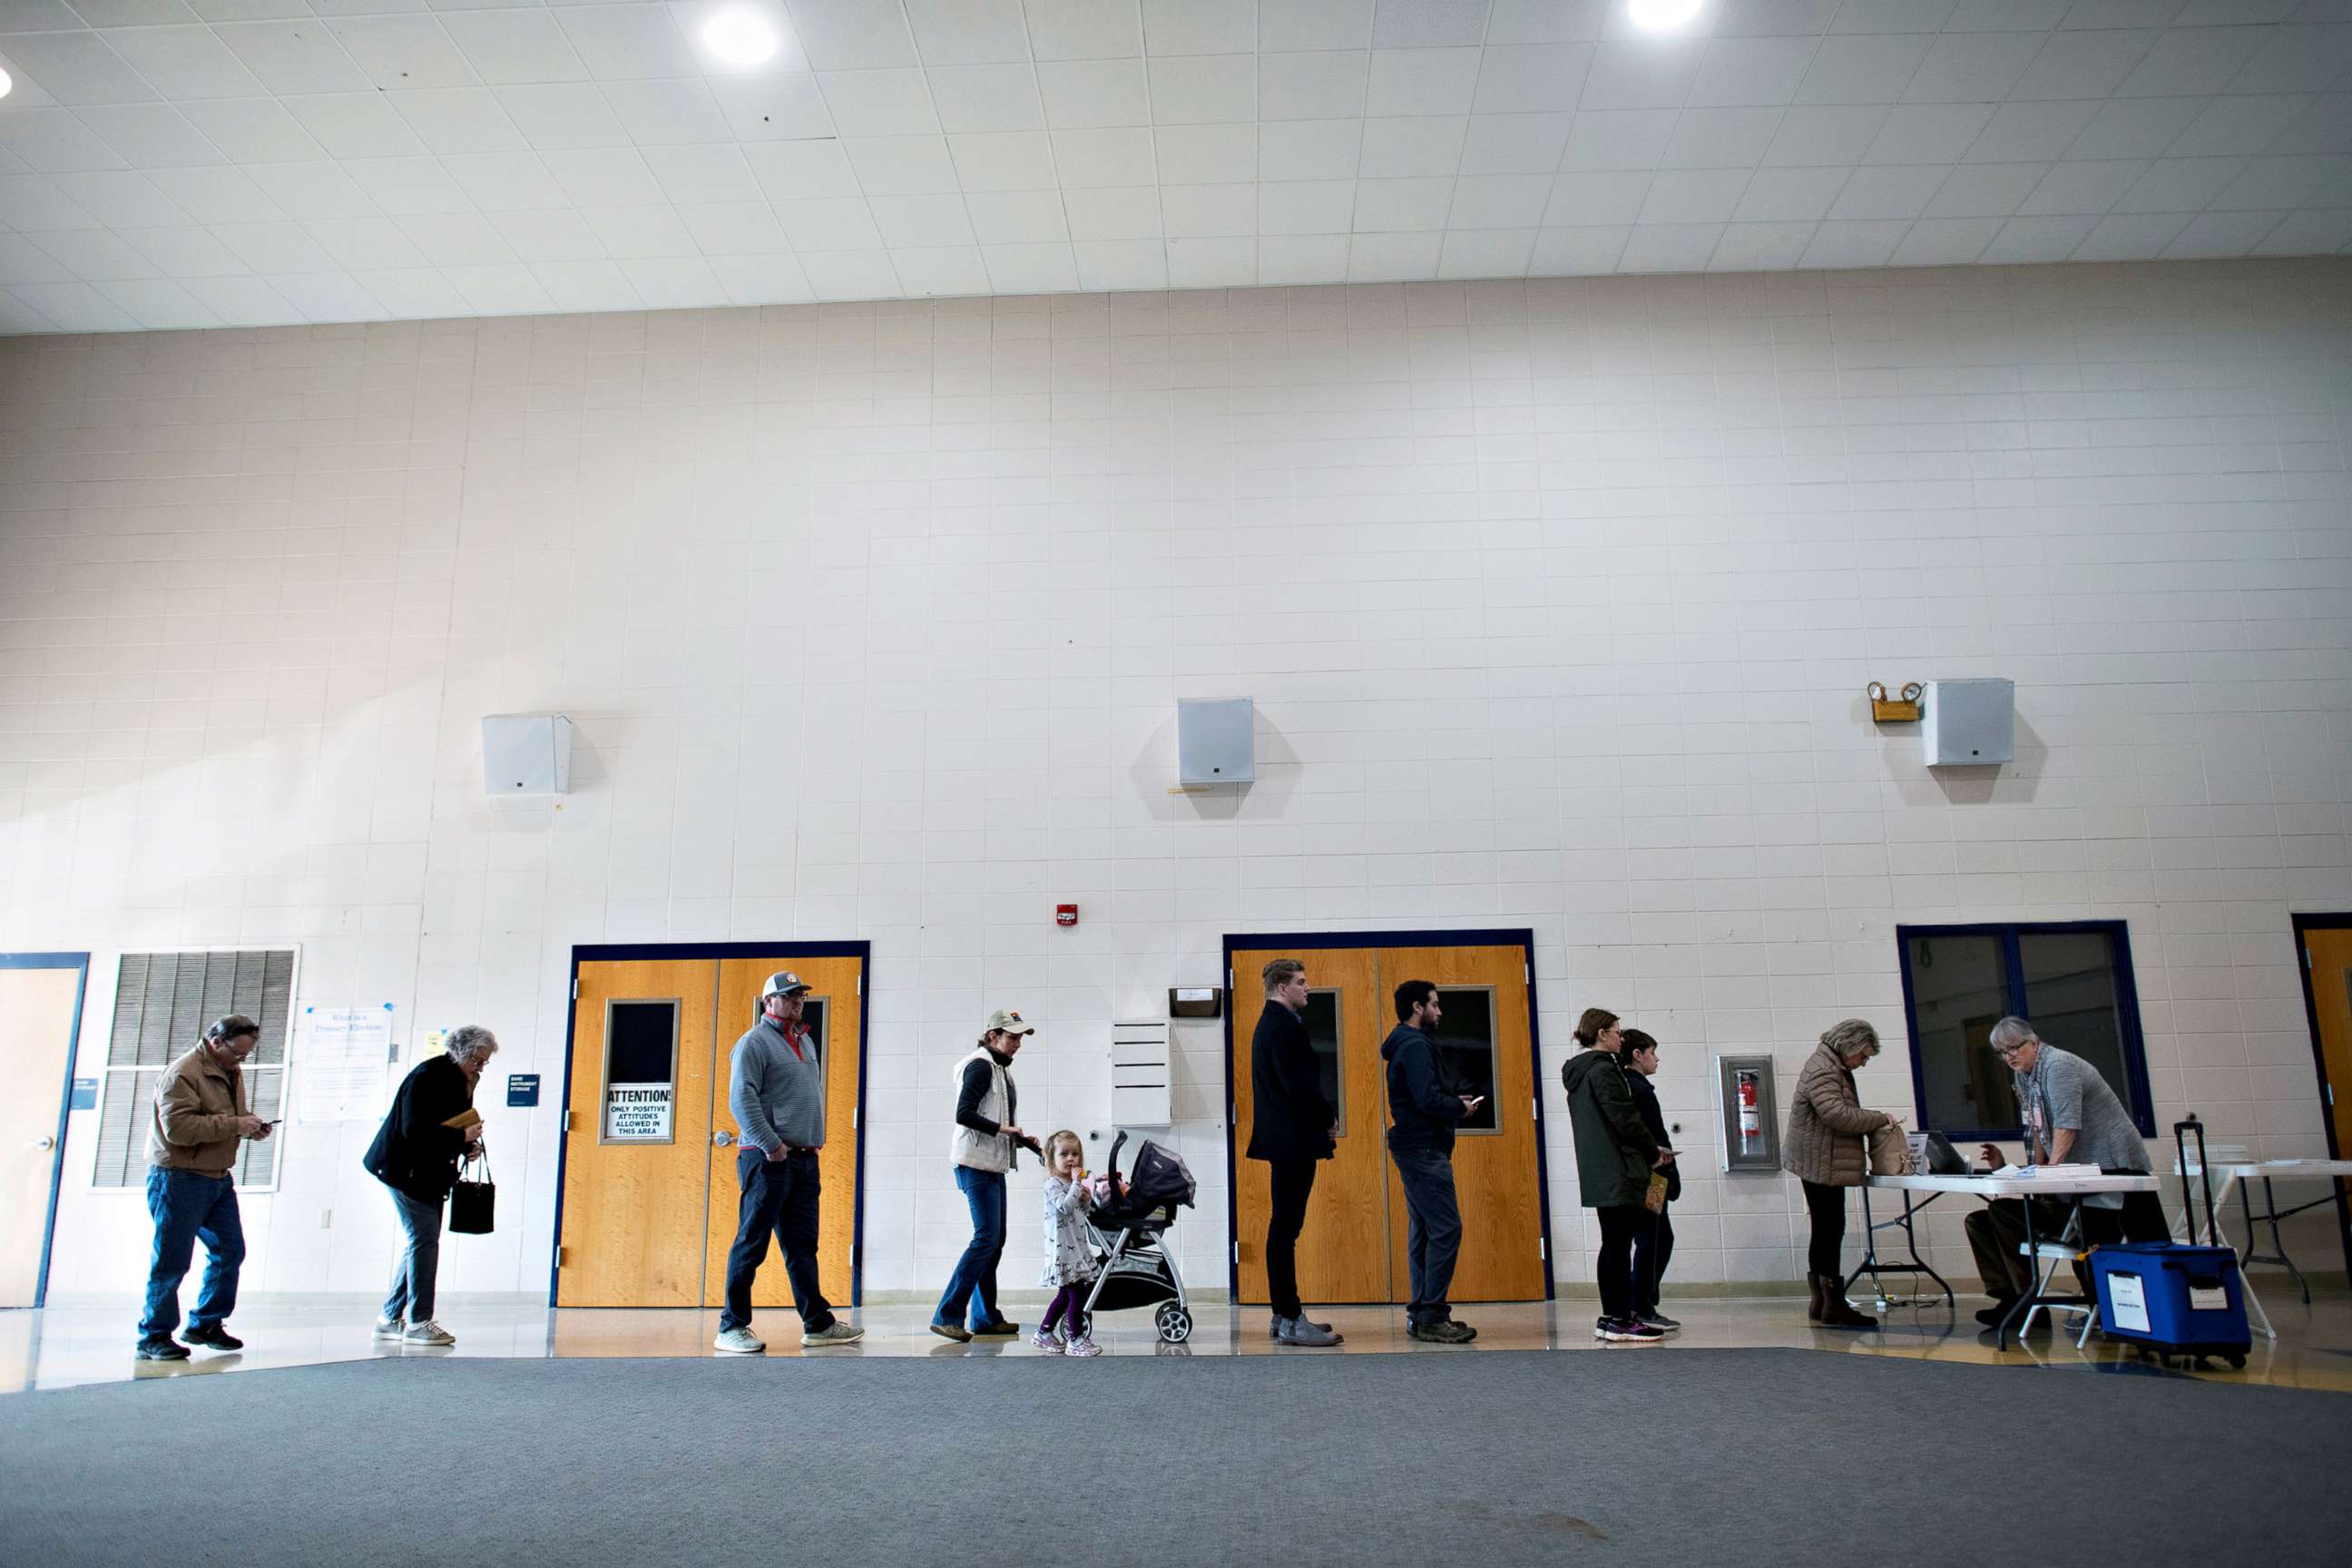 PHOTO: Voters line up to register before casting their ballots at the Spartanburg High School polling location for the Democratic presidential primary in Spartanburg, S.C., Feb. 29, 2020.